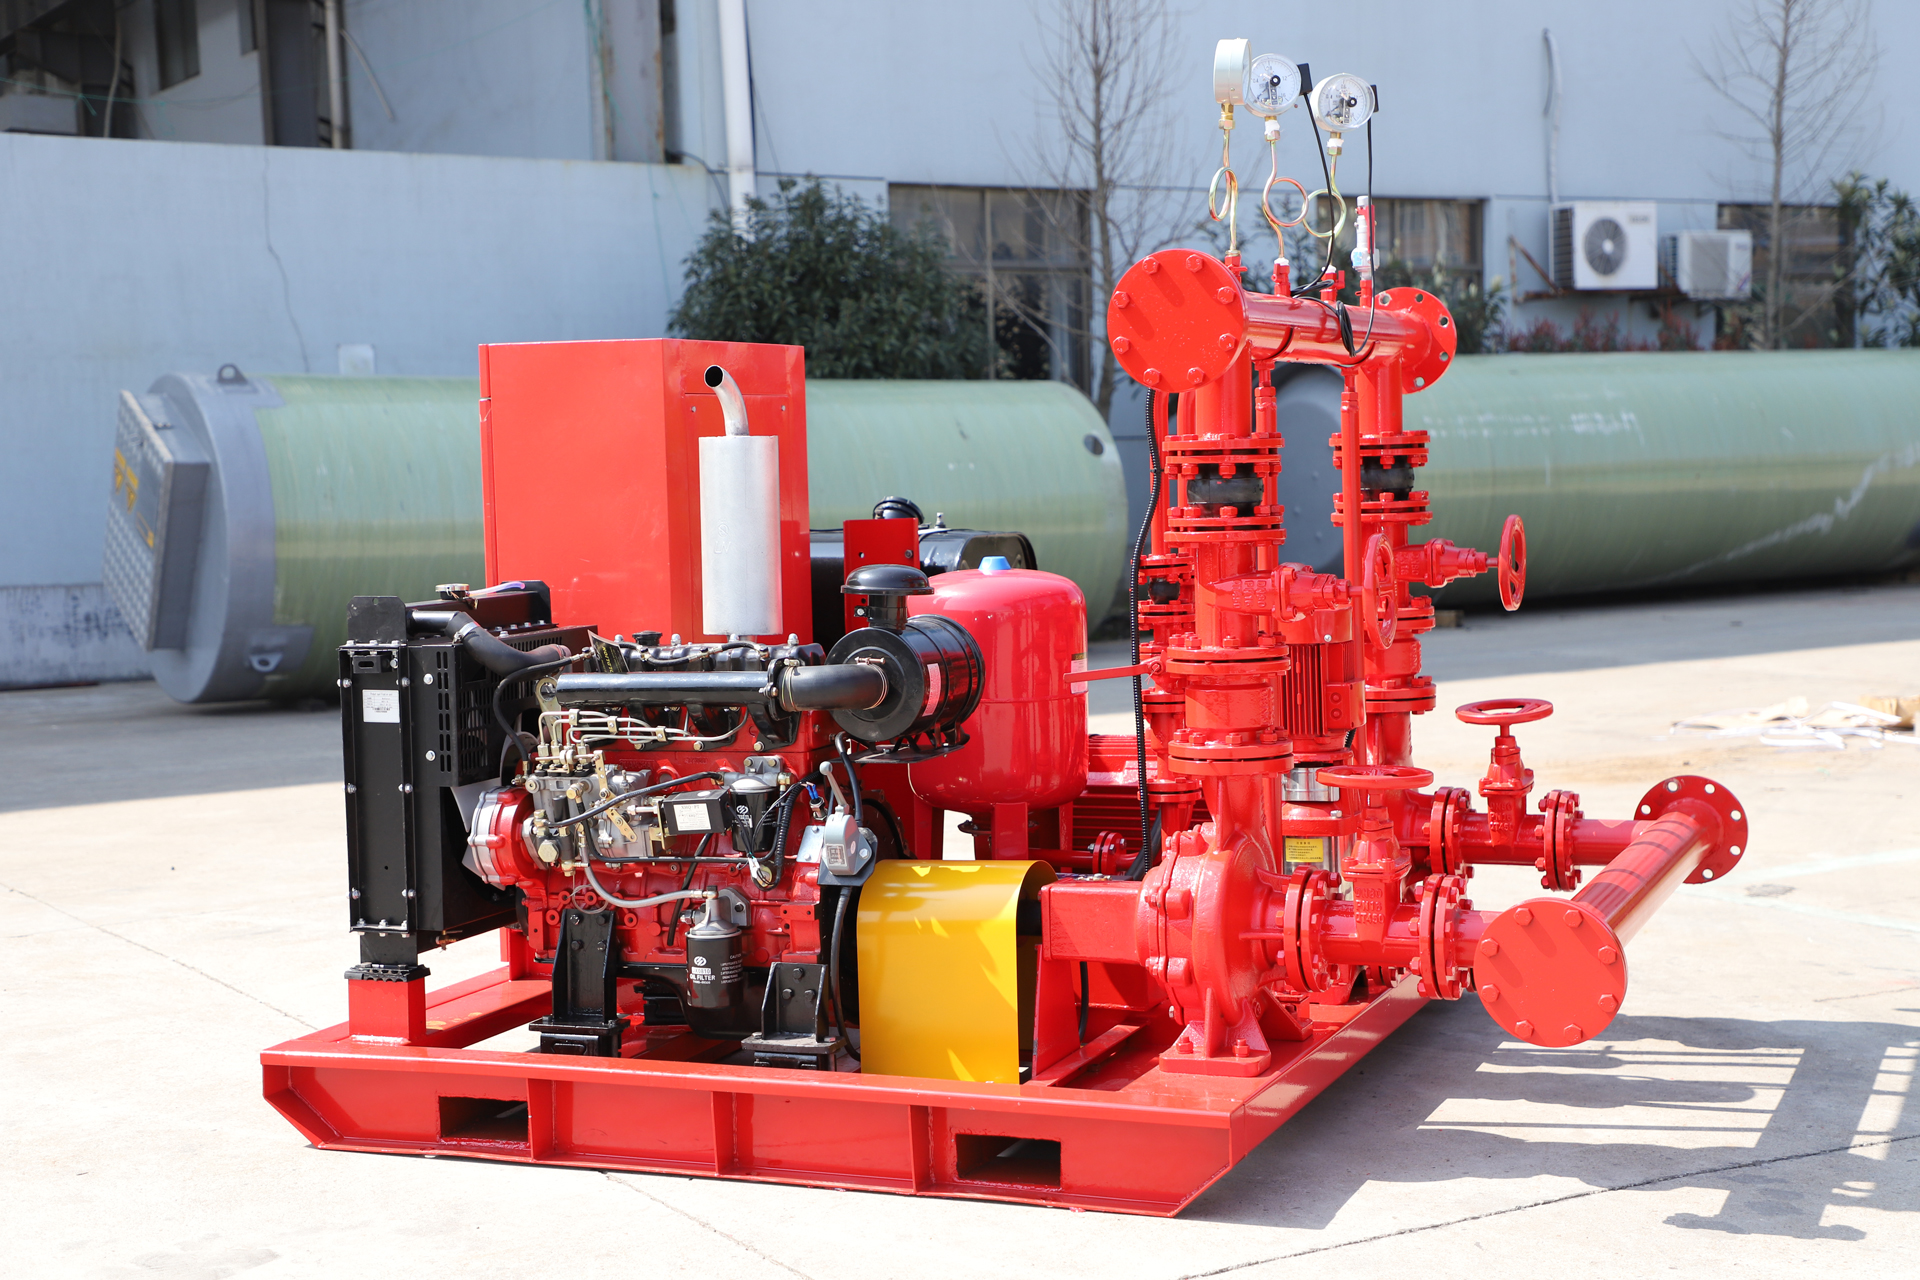 Fully automatic diesel engine fire pump purchase notice